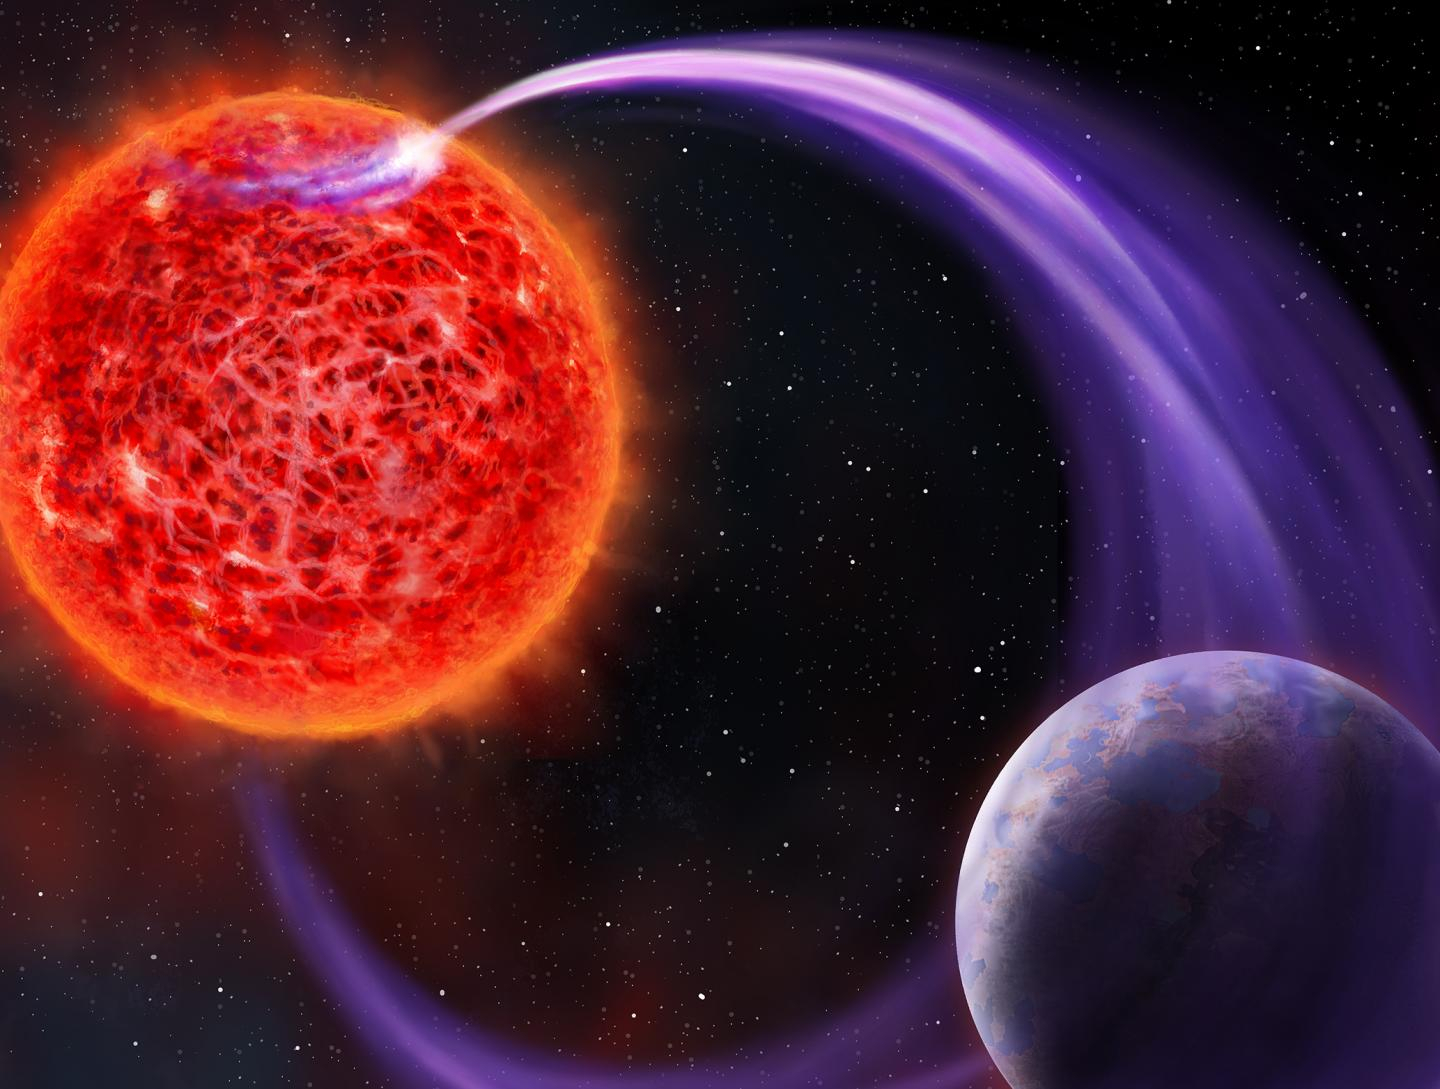 Can a rogue star kick Earth out of the solar system?